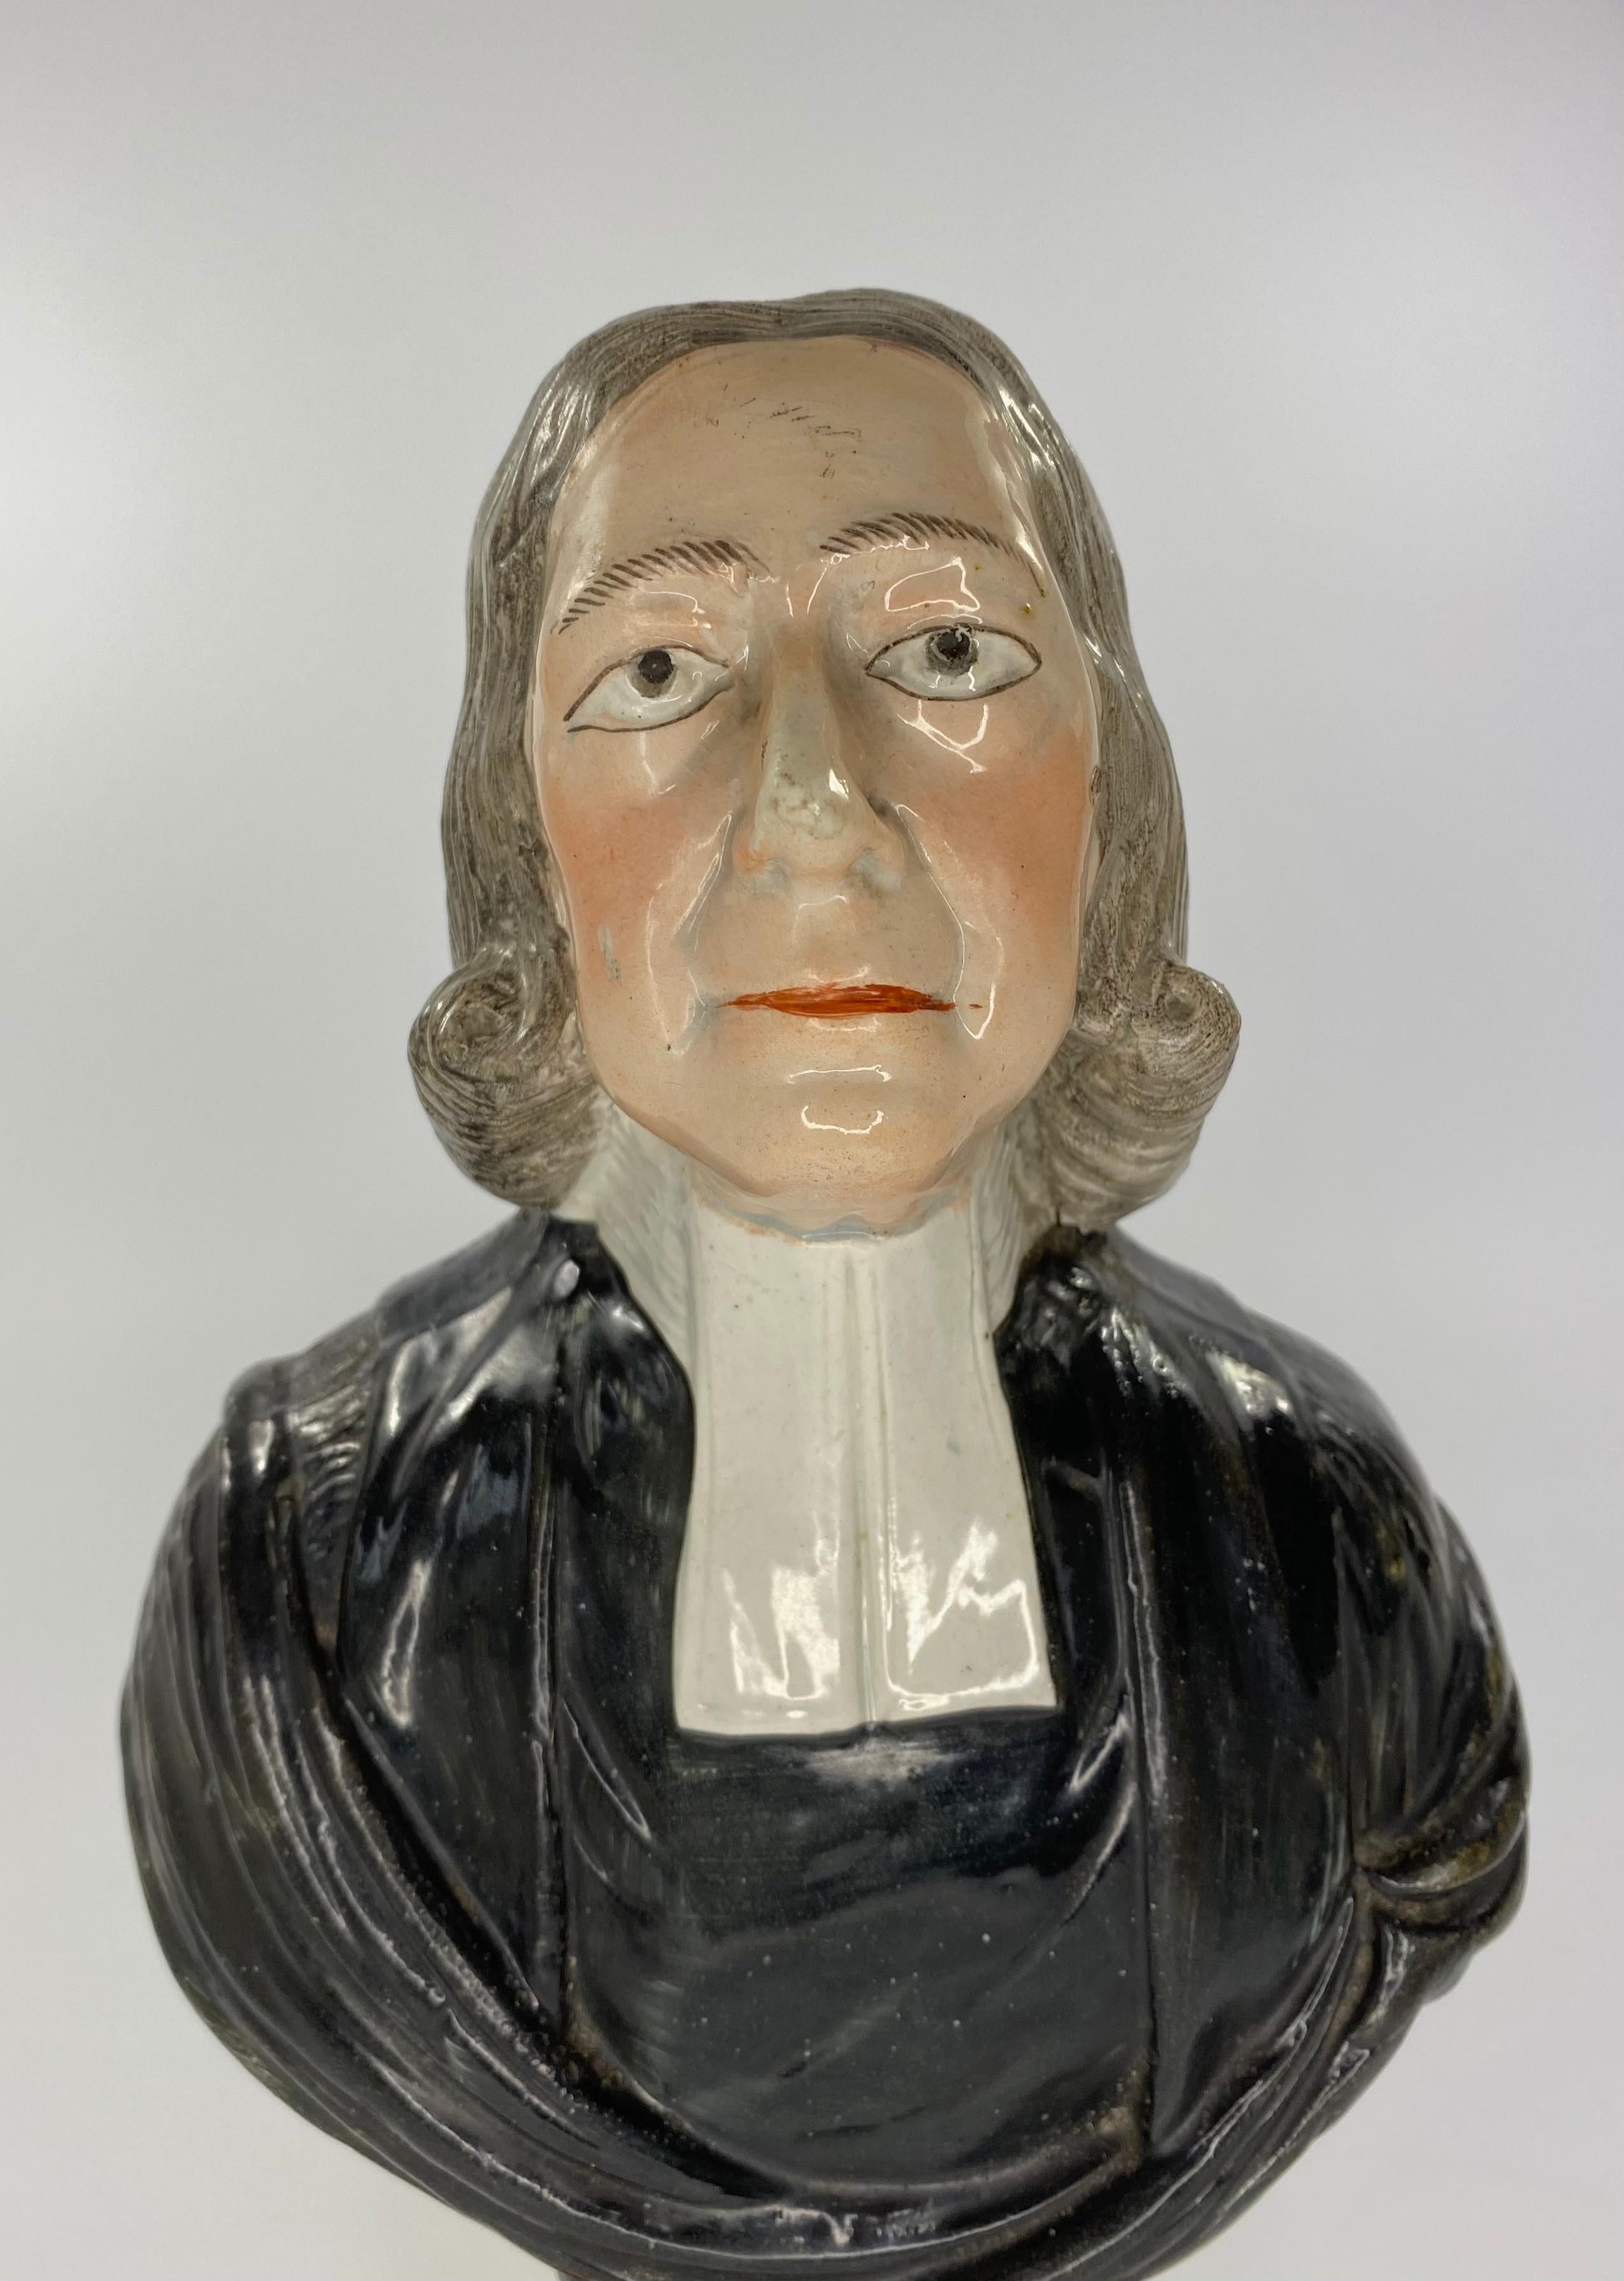 Staffordshire pottery bust, probably Enoch Wood, c. 1830. Finely modelled as John Wesley, set upon a vibrantly enamelled, socle base, beneath a pearlware glaze.
Measures: Height 28.5 cm, 11 1/4”.
Width 15.5 cm, 6 1/8”.
Depth 10.5 cm, 4